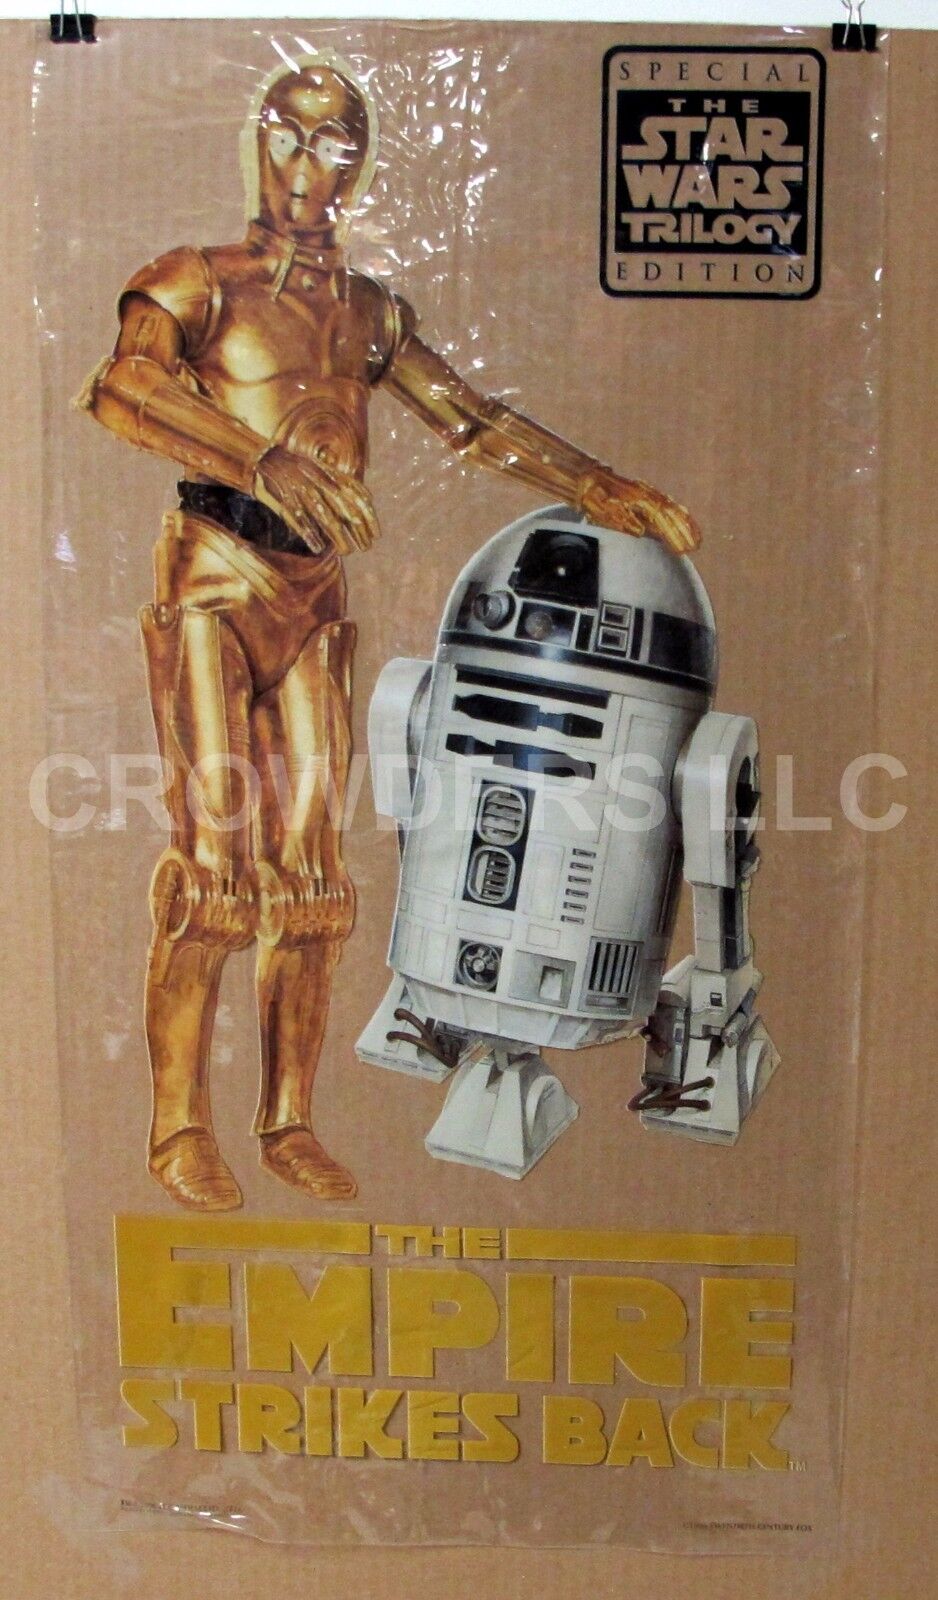 Star Wars Special Edition Empire Strikes Back C3PO R2D2 Back Window Cling 15x28